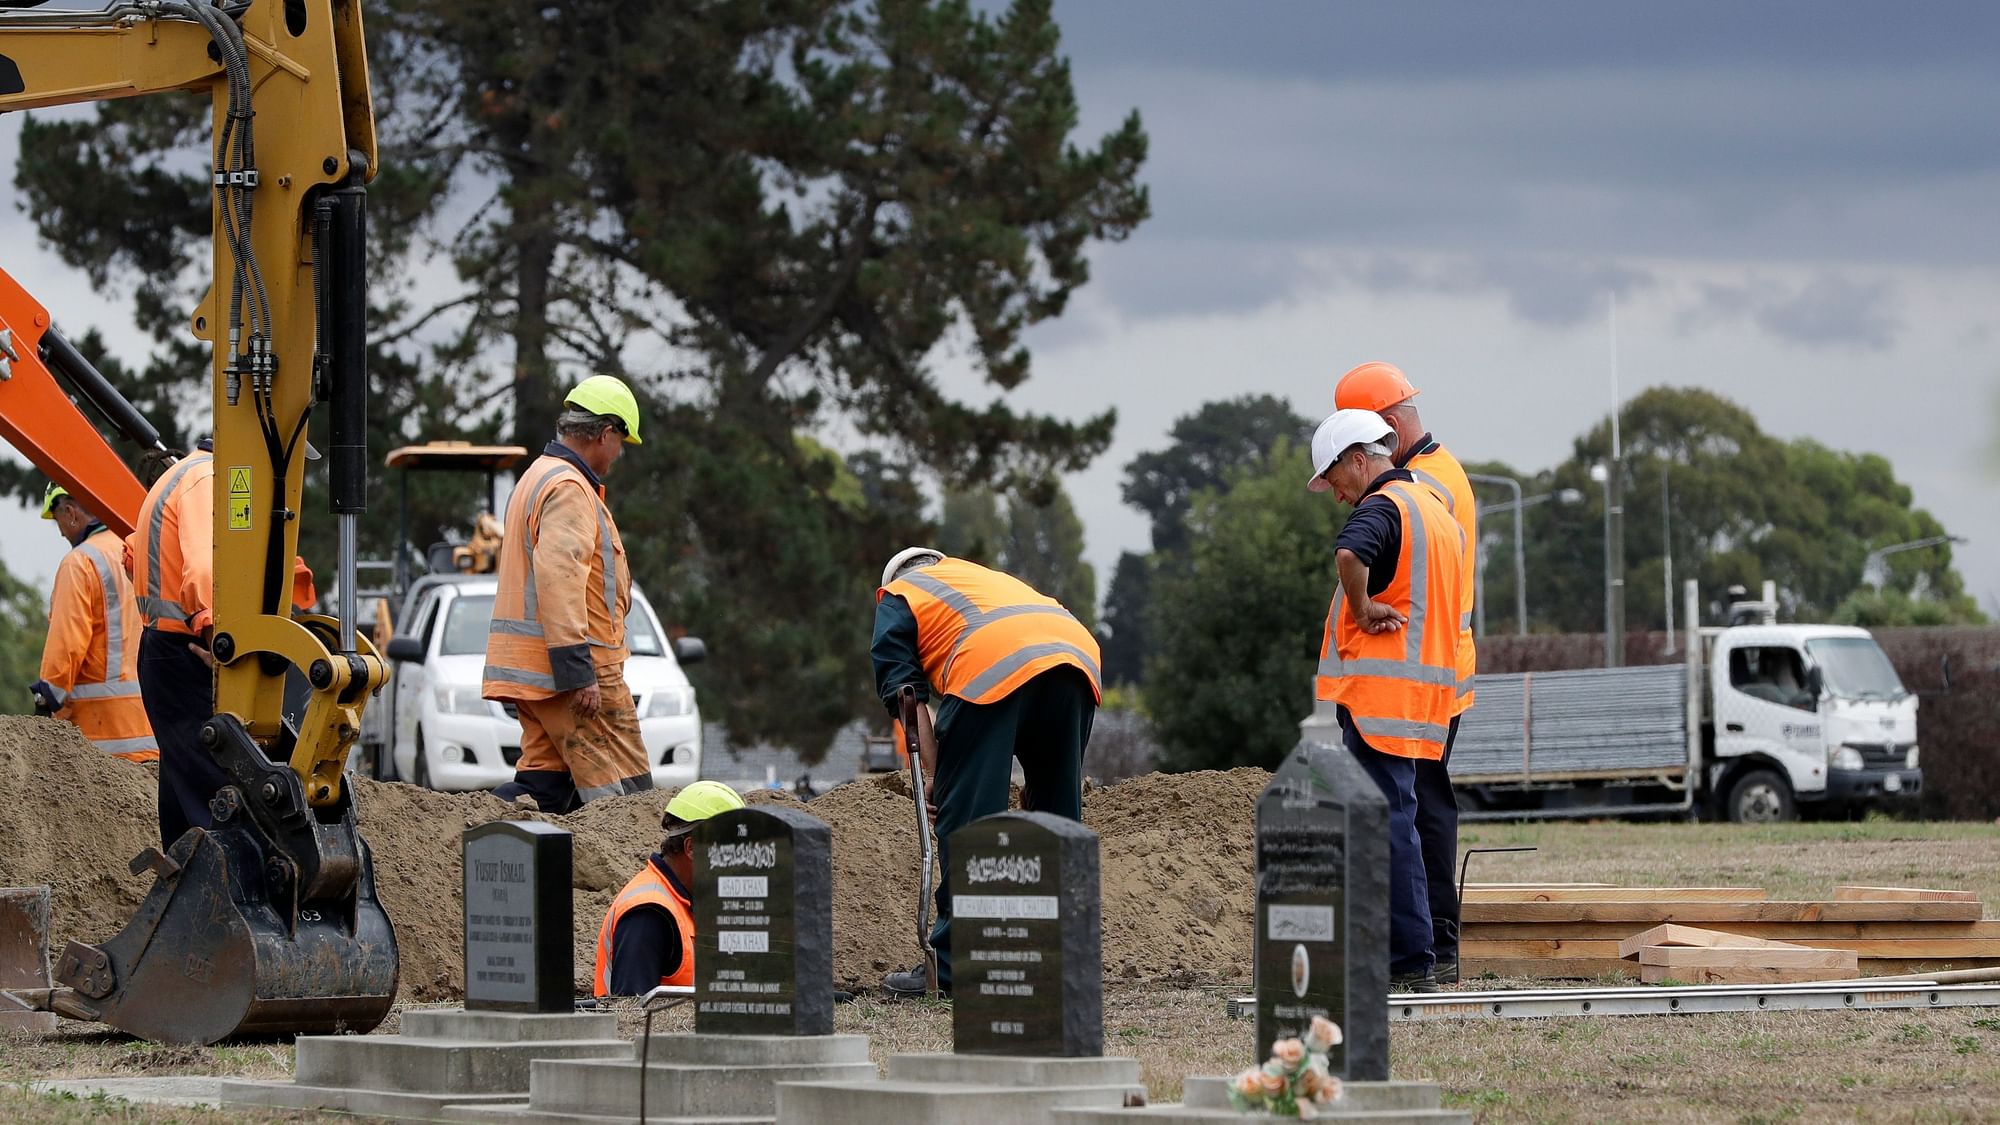 Workers dig graves at a Muslim cemetery in Christchurch, New Zealand, Saturday, 16 March 2019, for victims of a mass shooing at two area mosques.